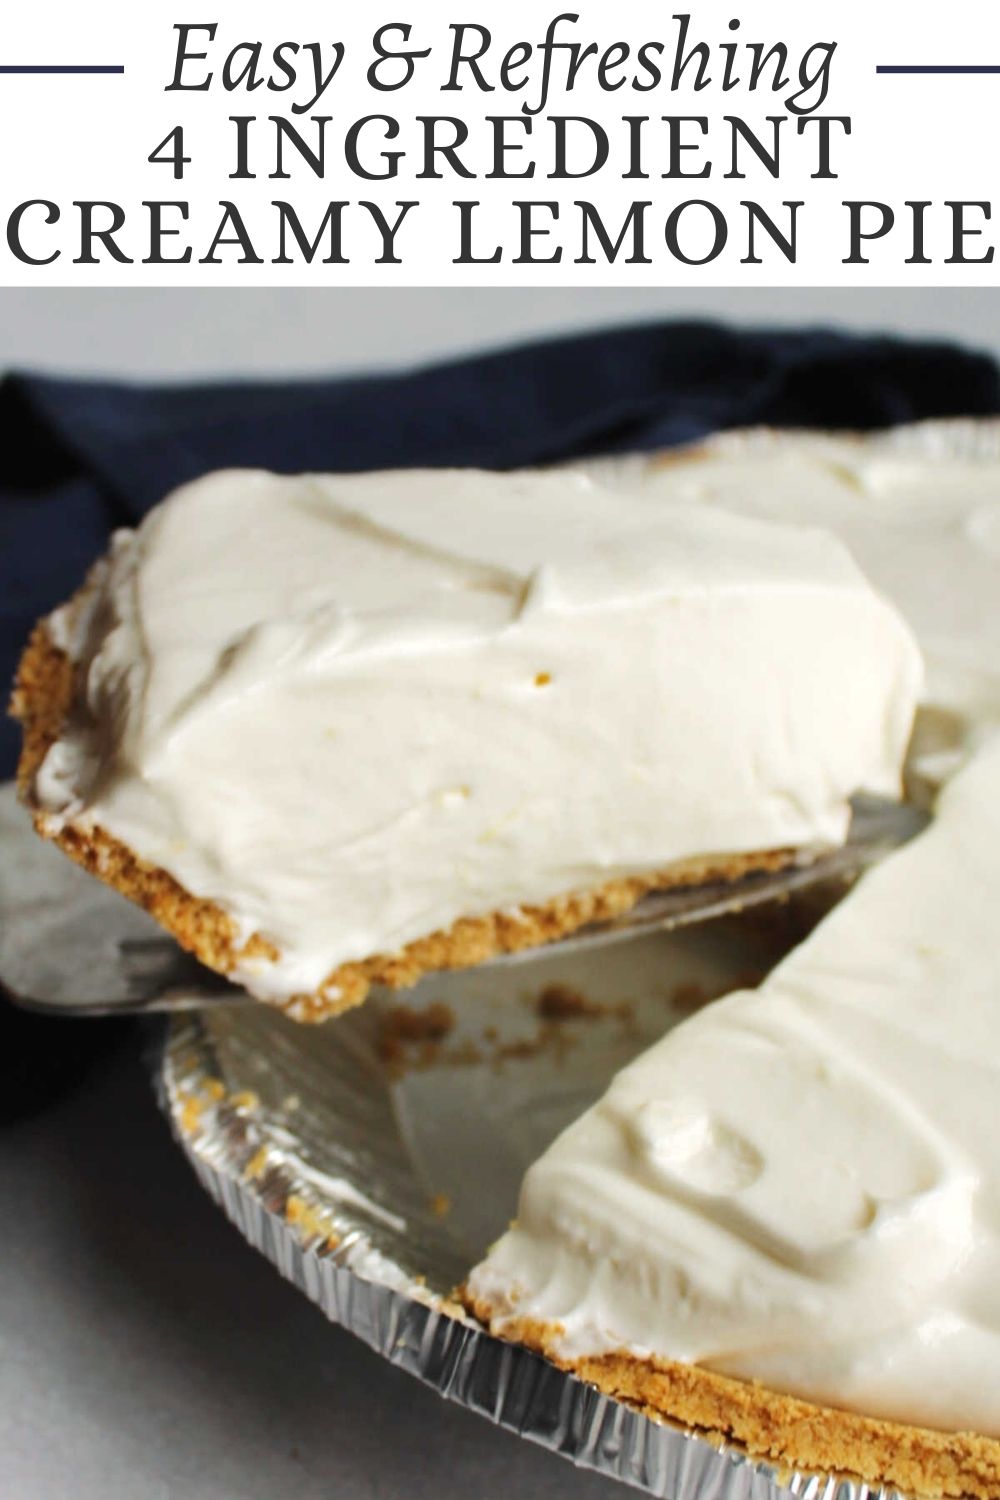 This is the easiest no bake lemon pie out there. It is creamy, citrusy, cold and oh so delicious.